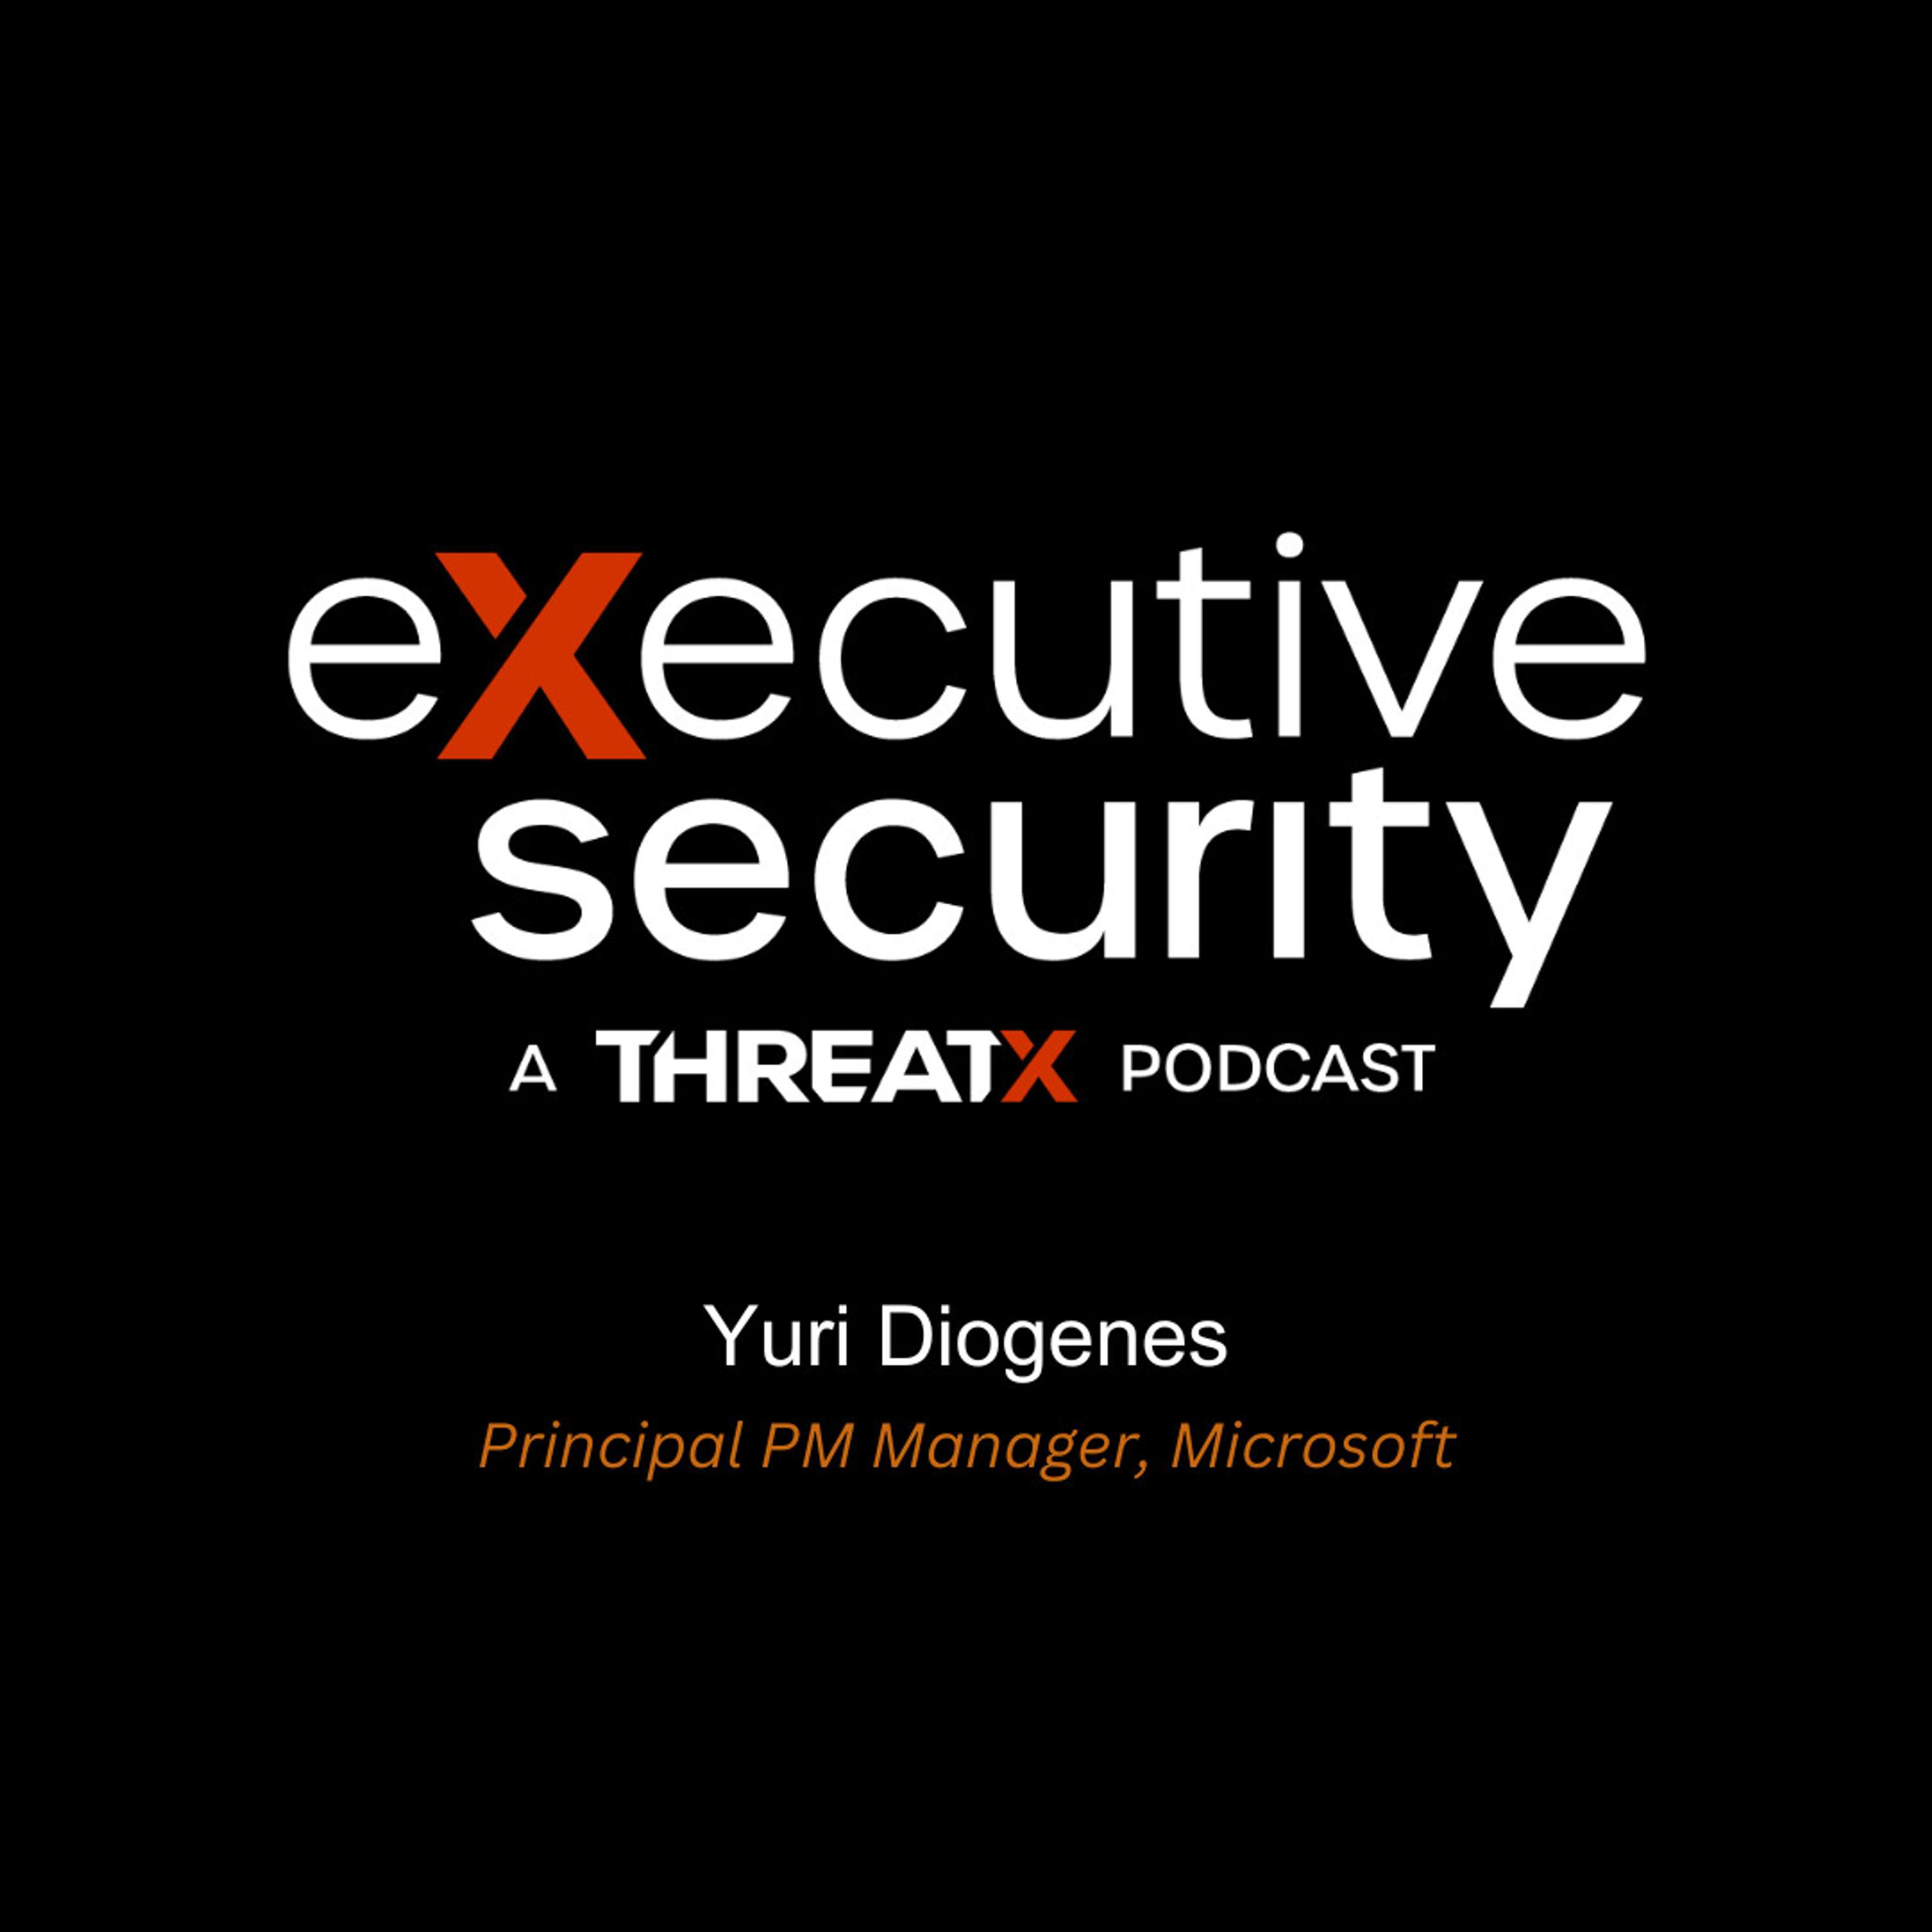 Building a Career in Cybersecurity With Yuri Diogenes of Microsoft